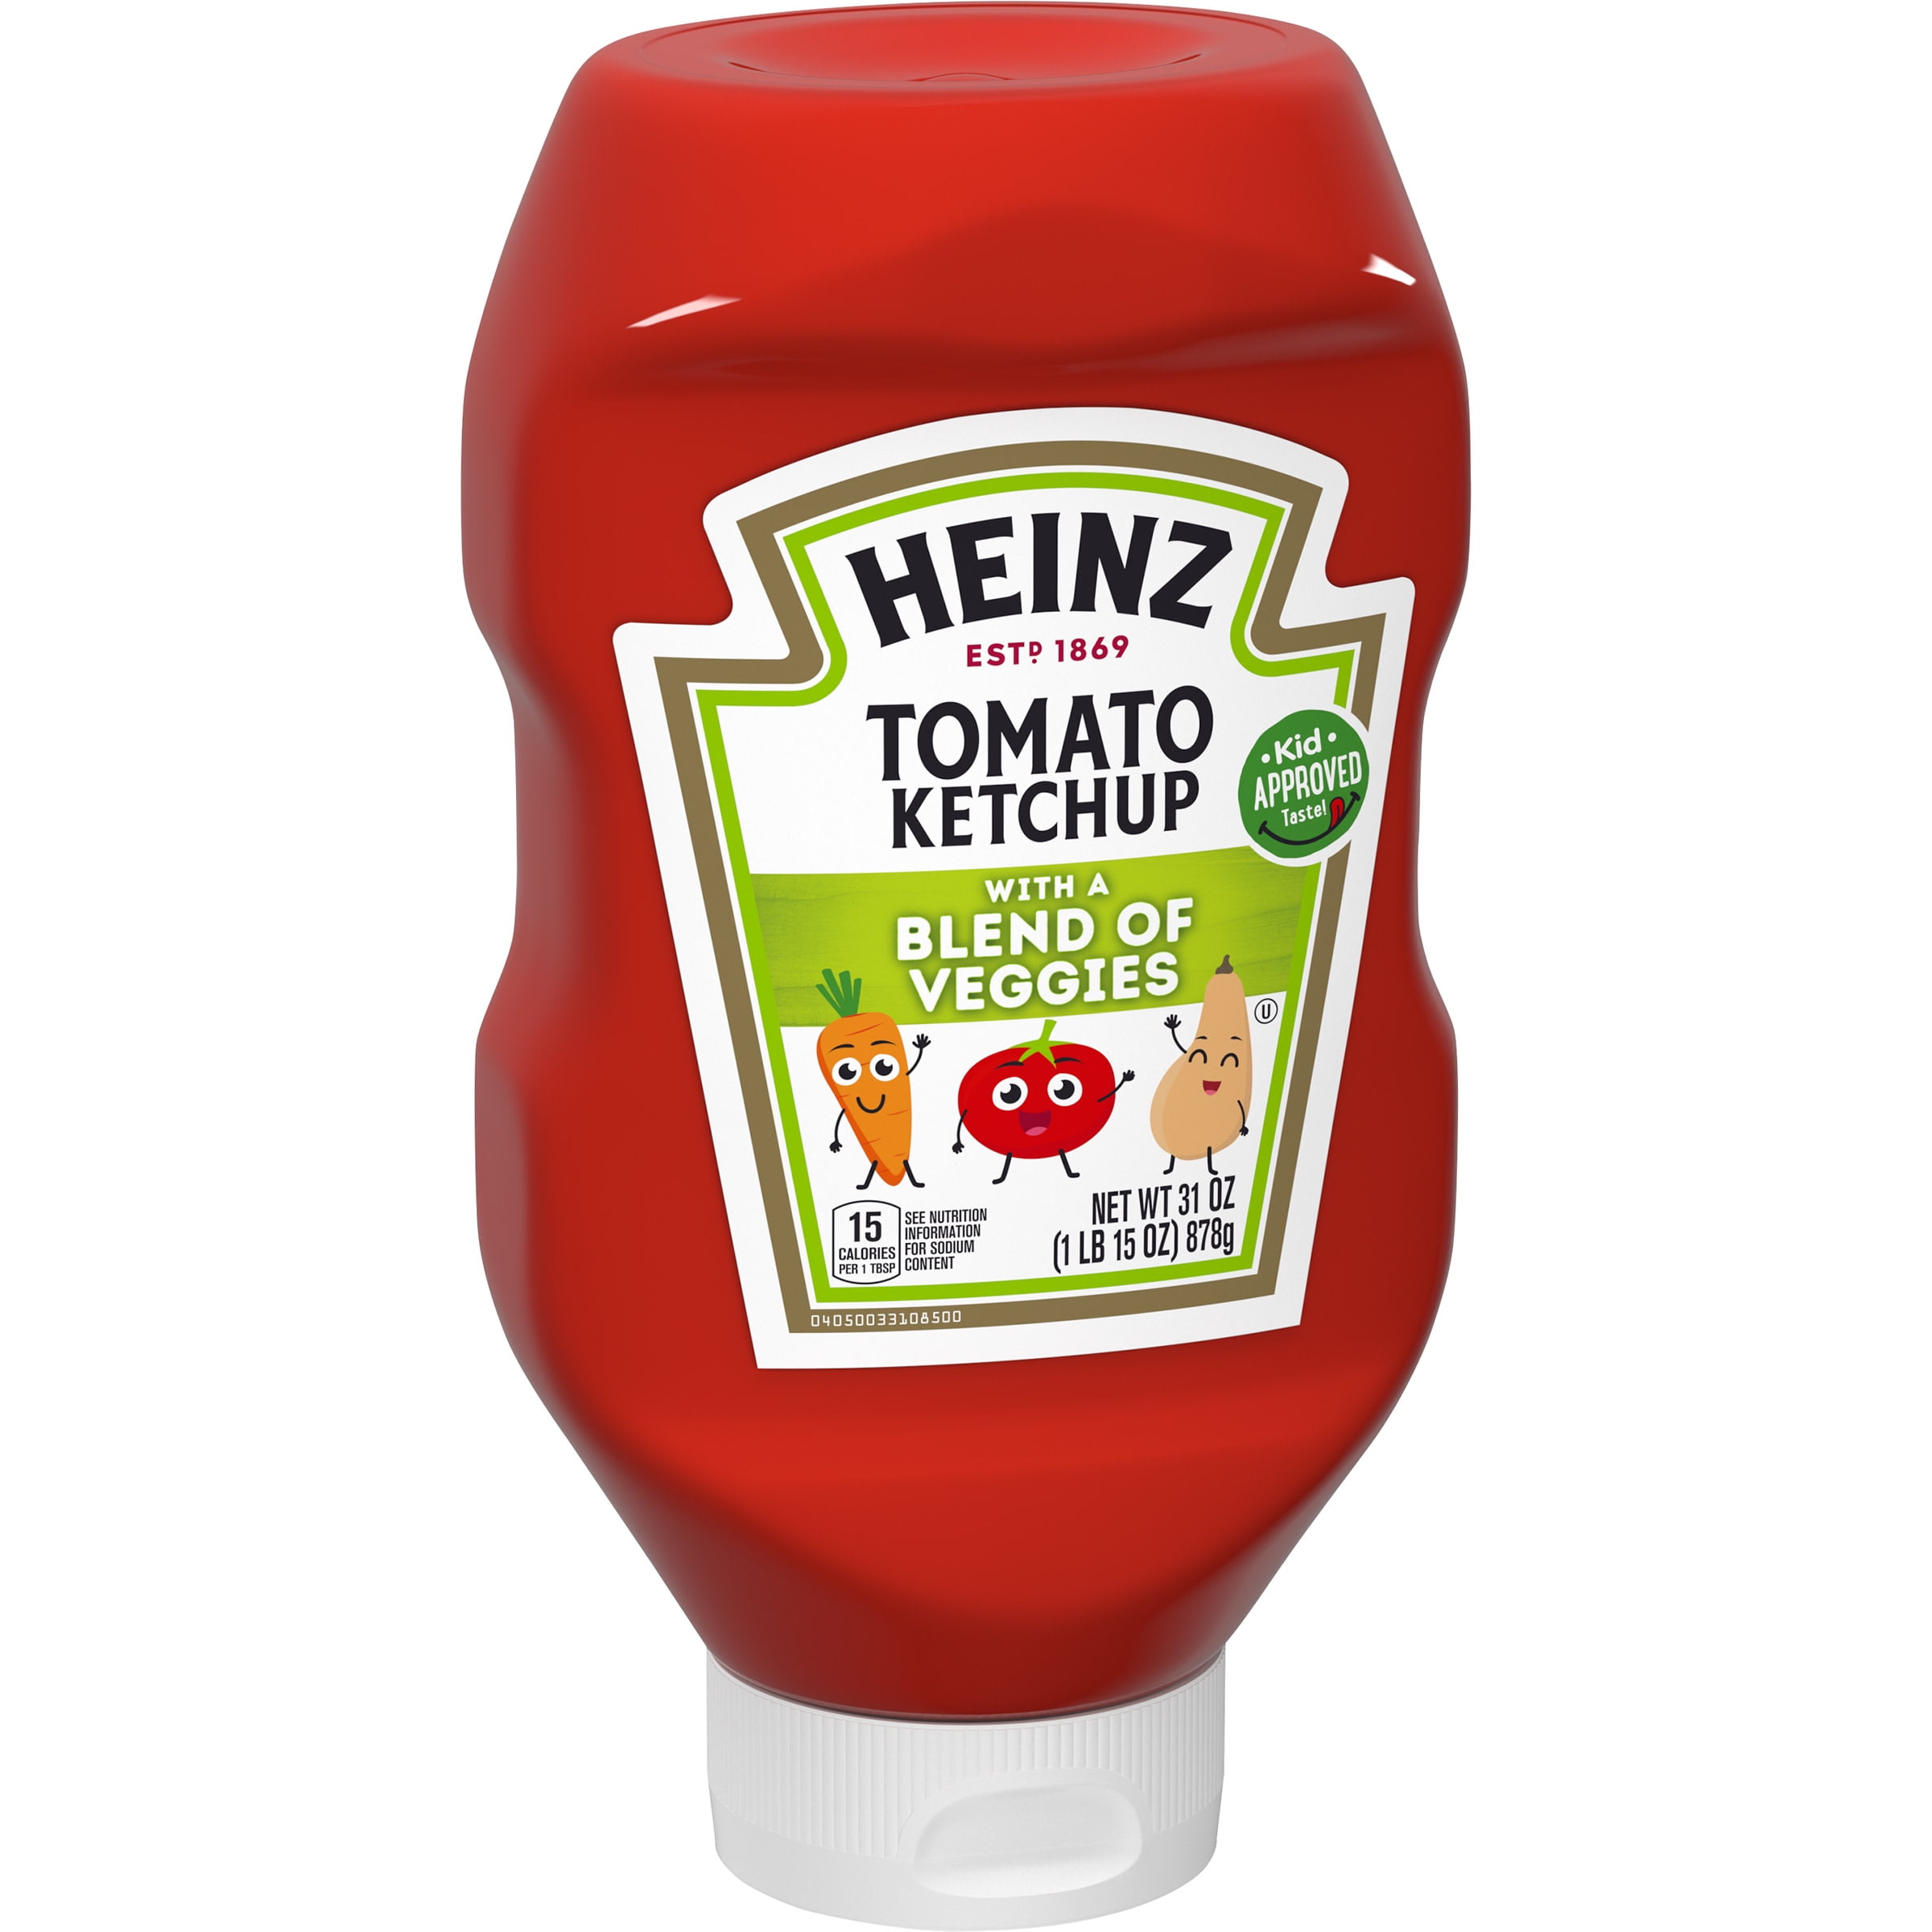 Is Ketchup a Vegetable? - Eater